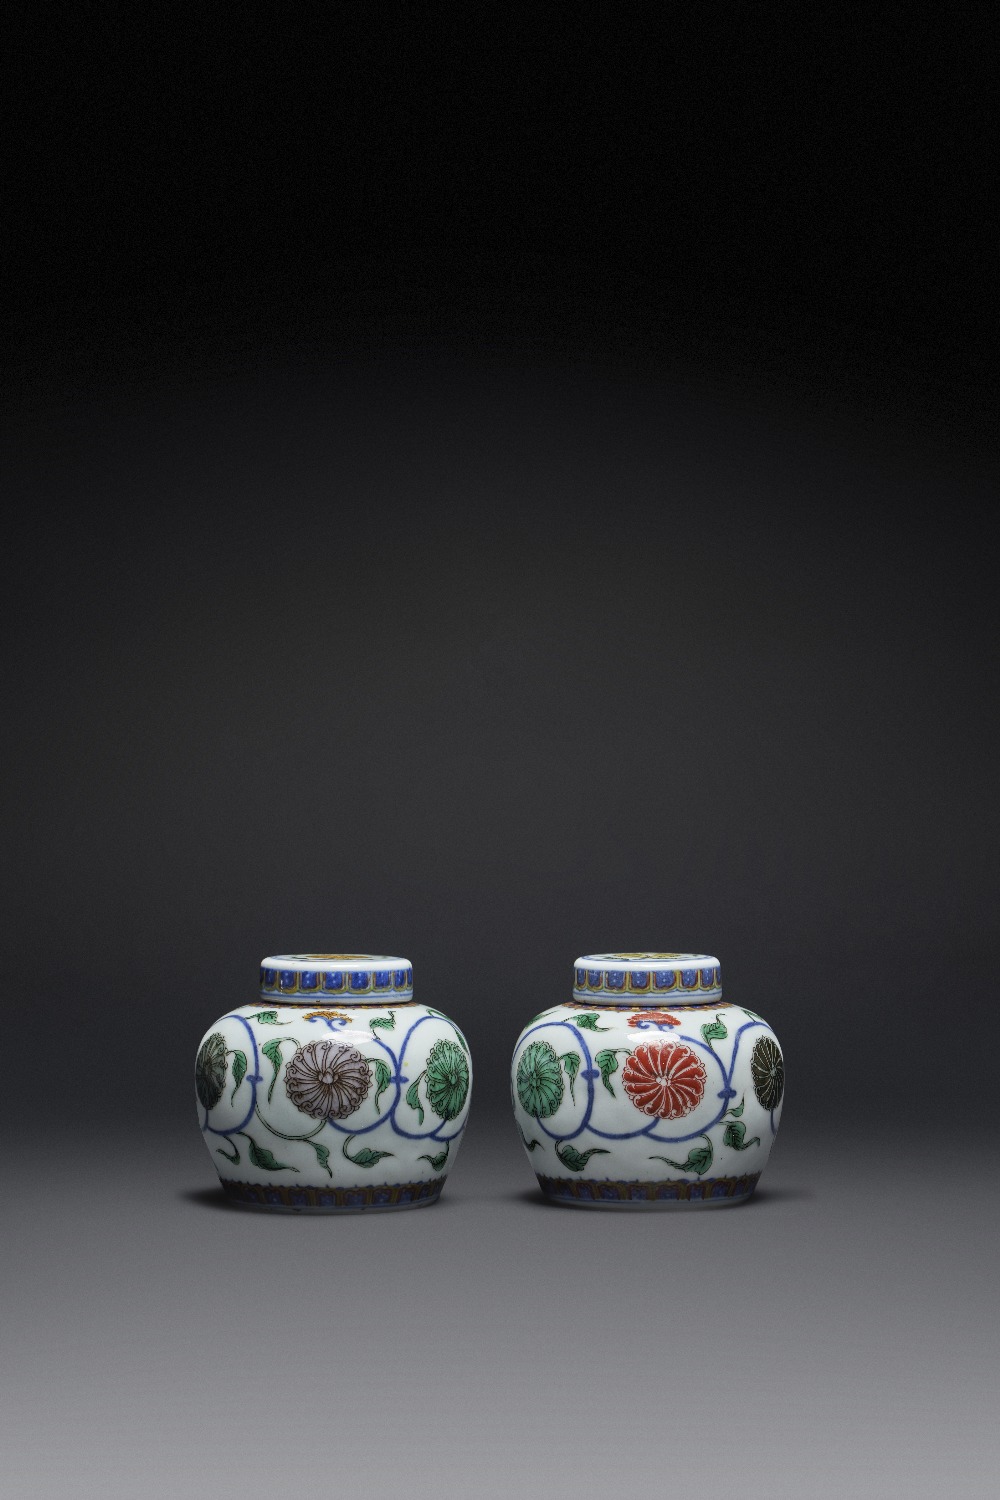 A RARE PAIR OF CHINESE WUCAI 'TIAN' JARS AND COVERS YONGZHENG 1723-35 The compressed circular bodies